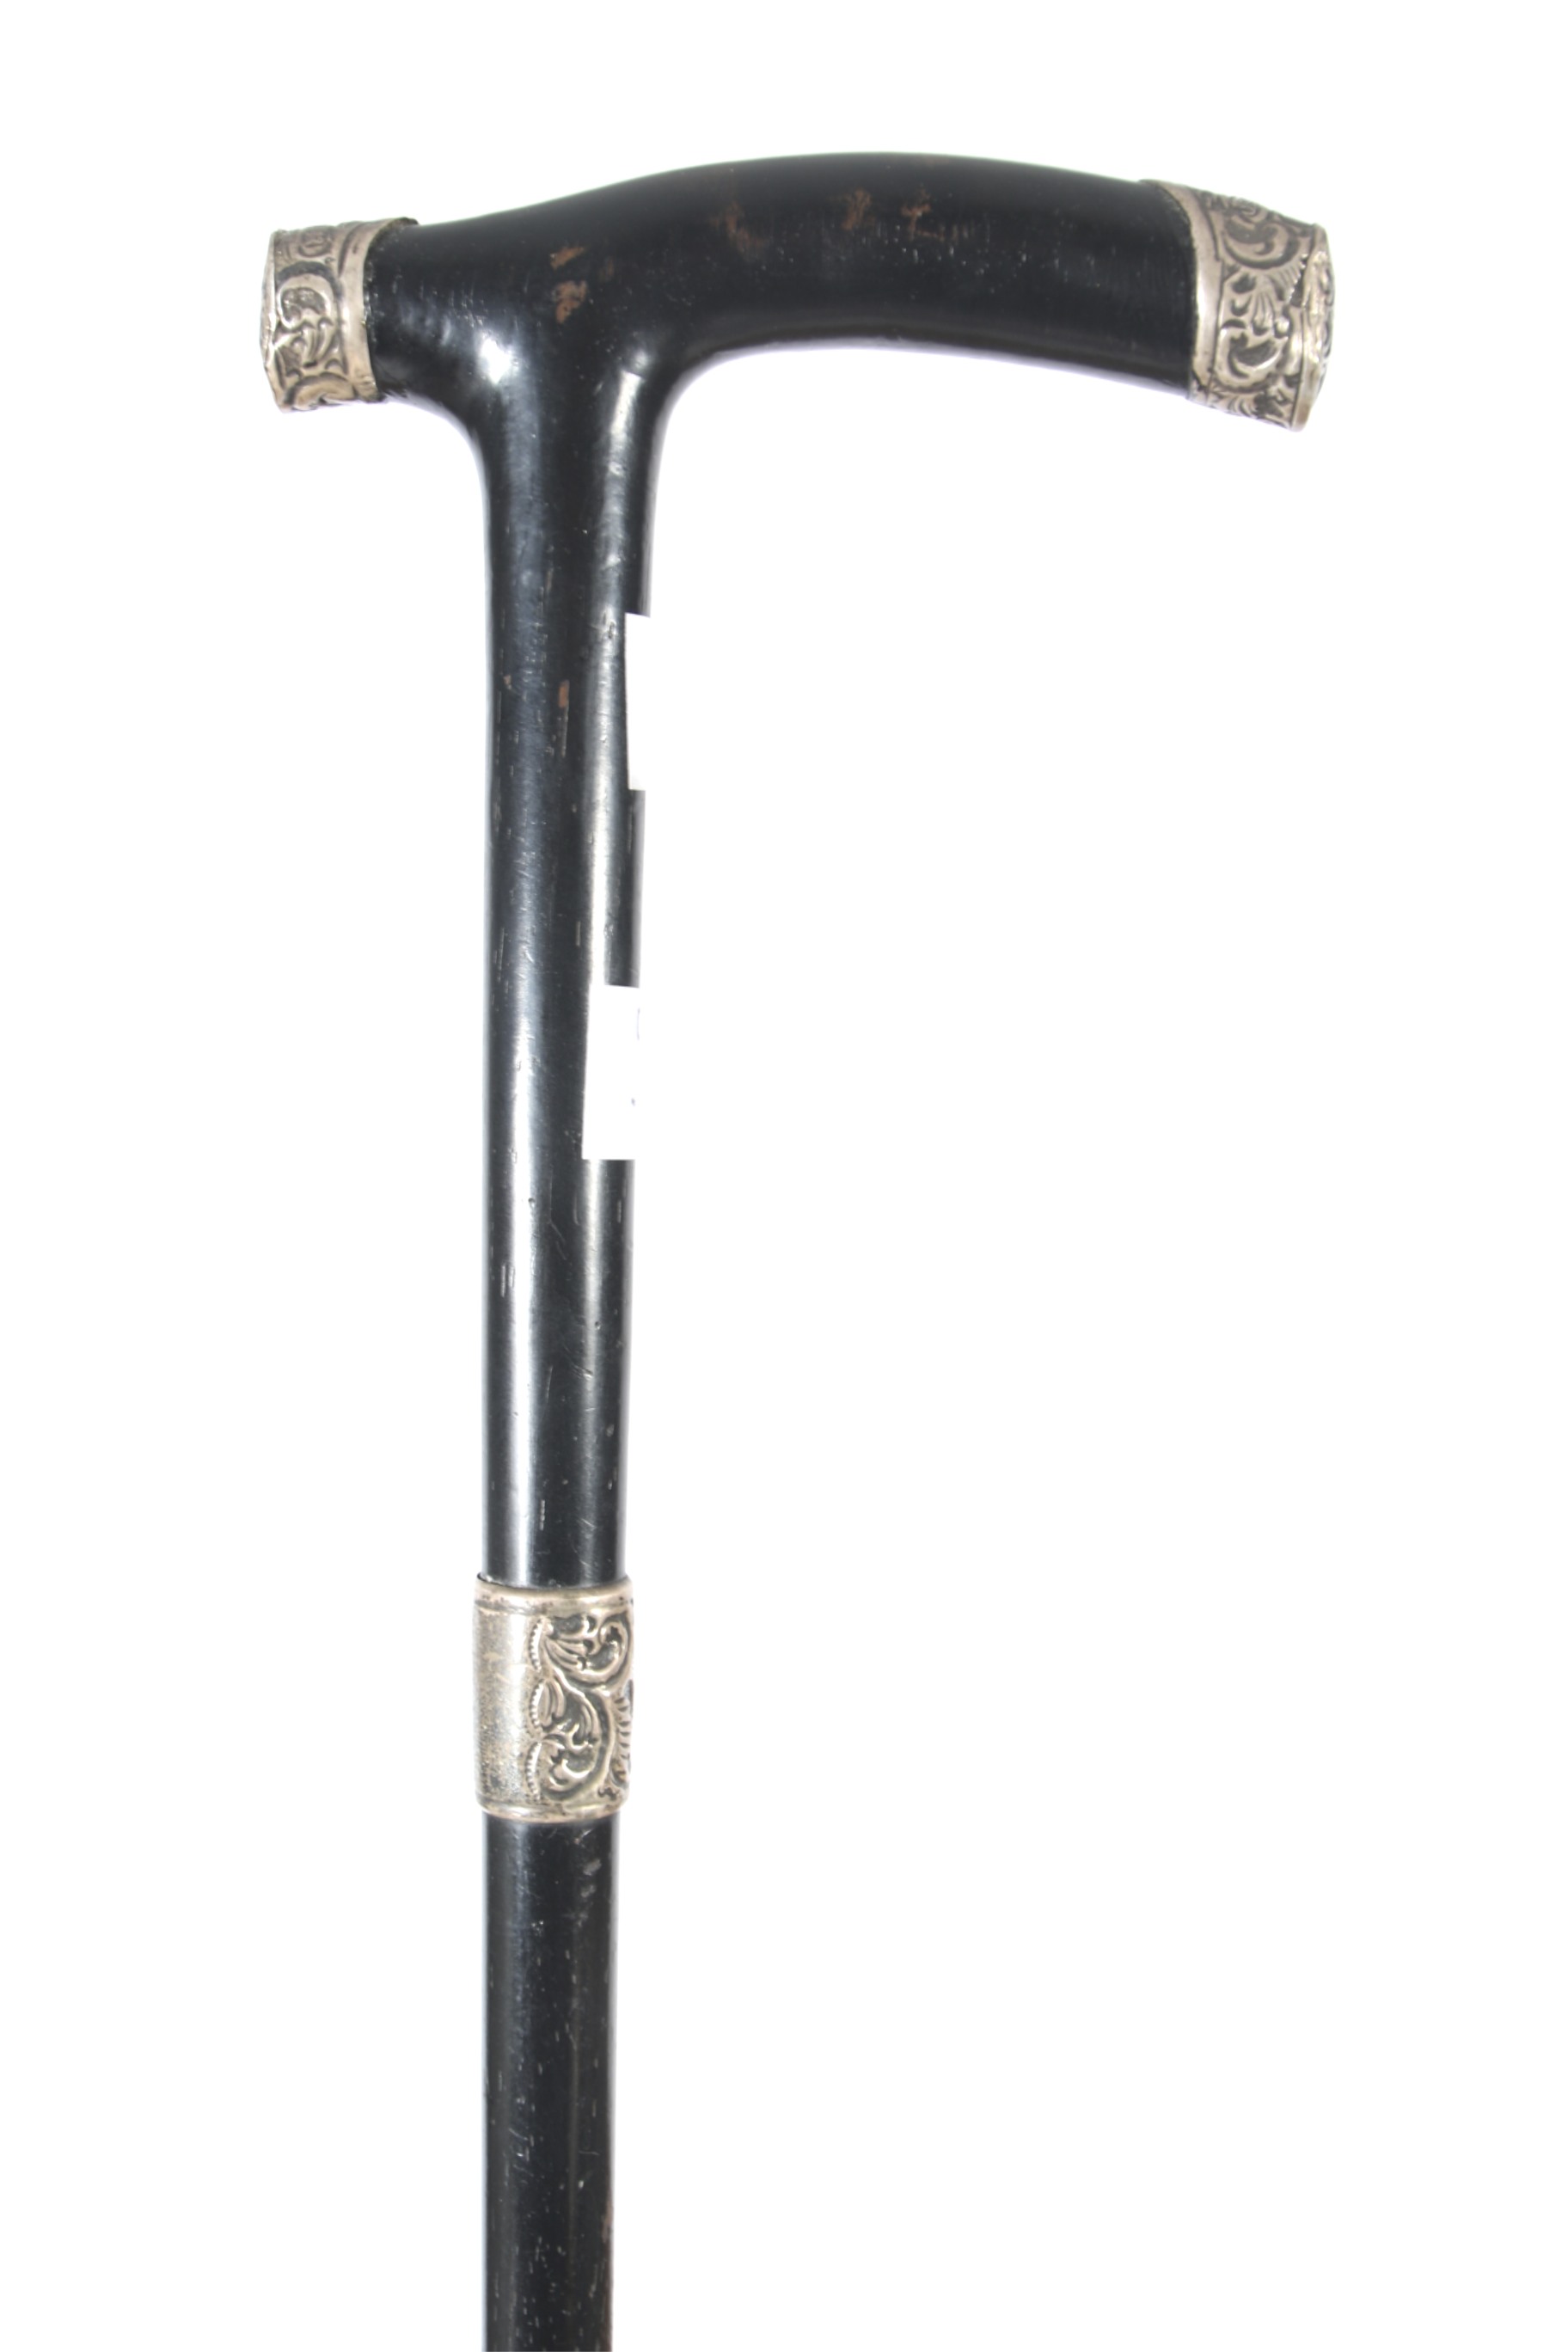 A Victorian ebony silver top and collared walking stick. - Image 2 of 2